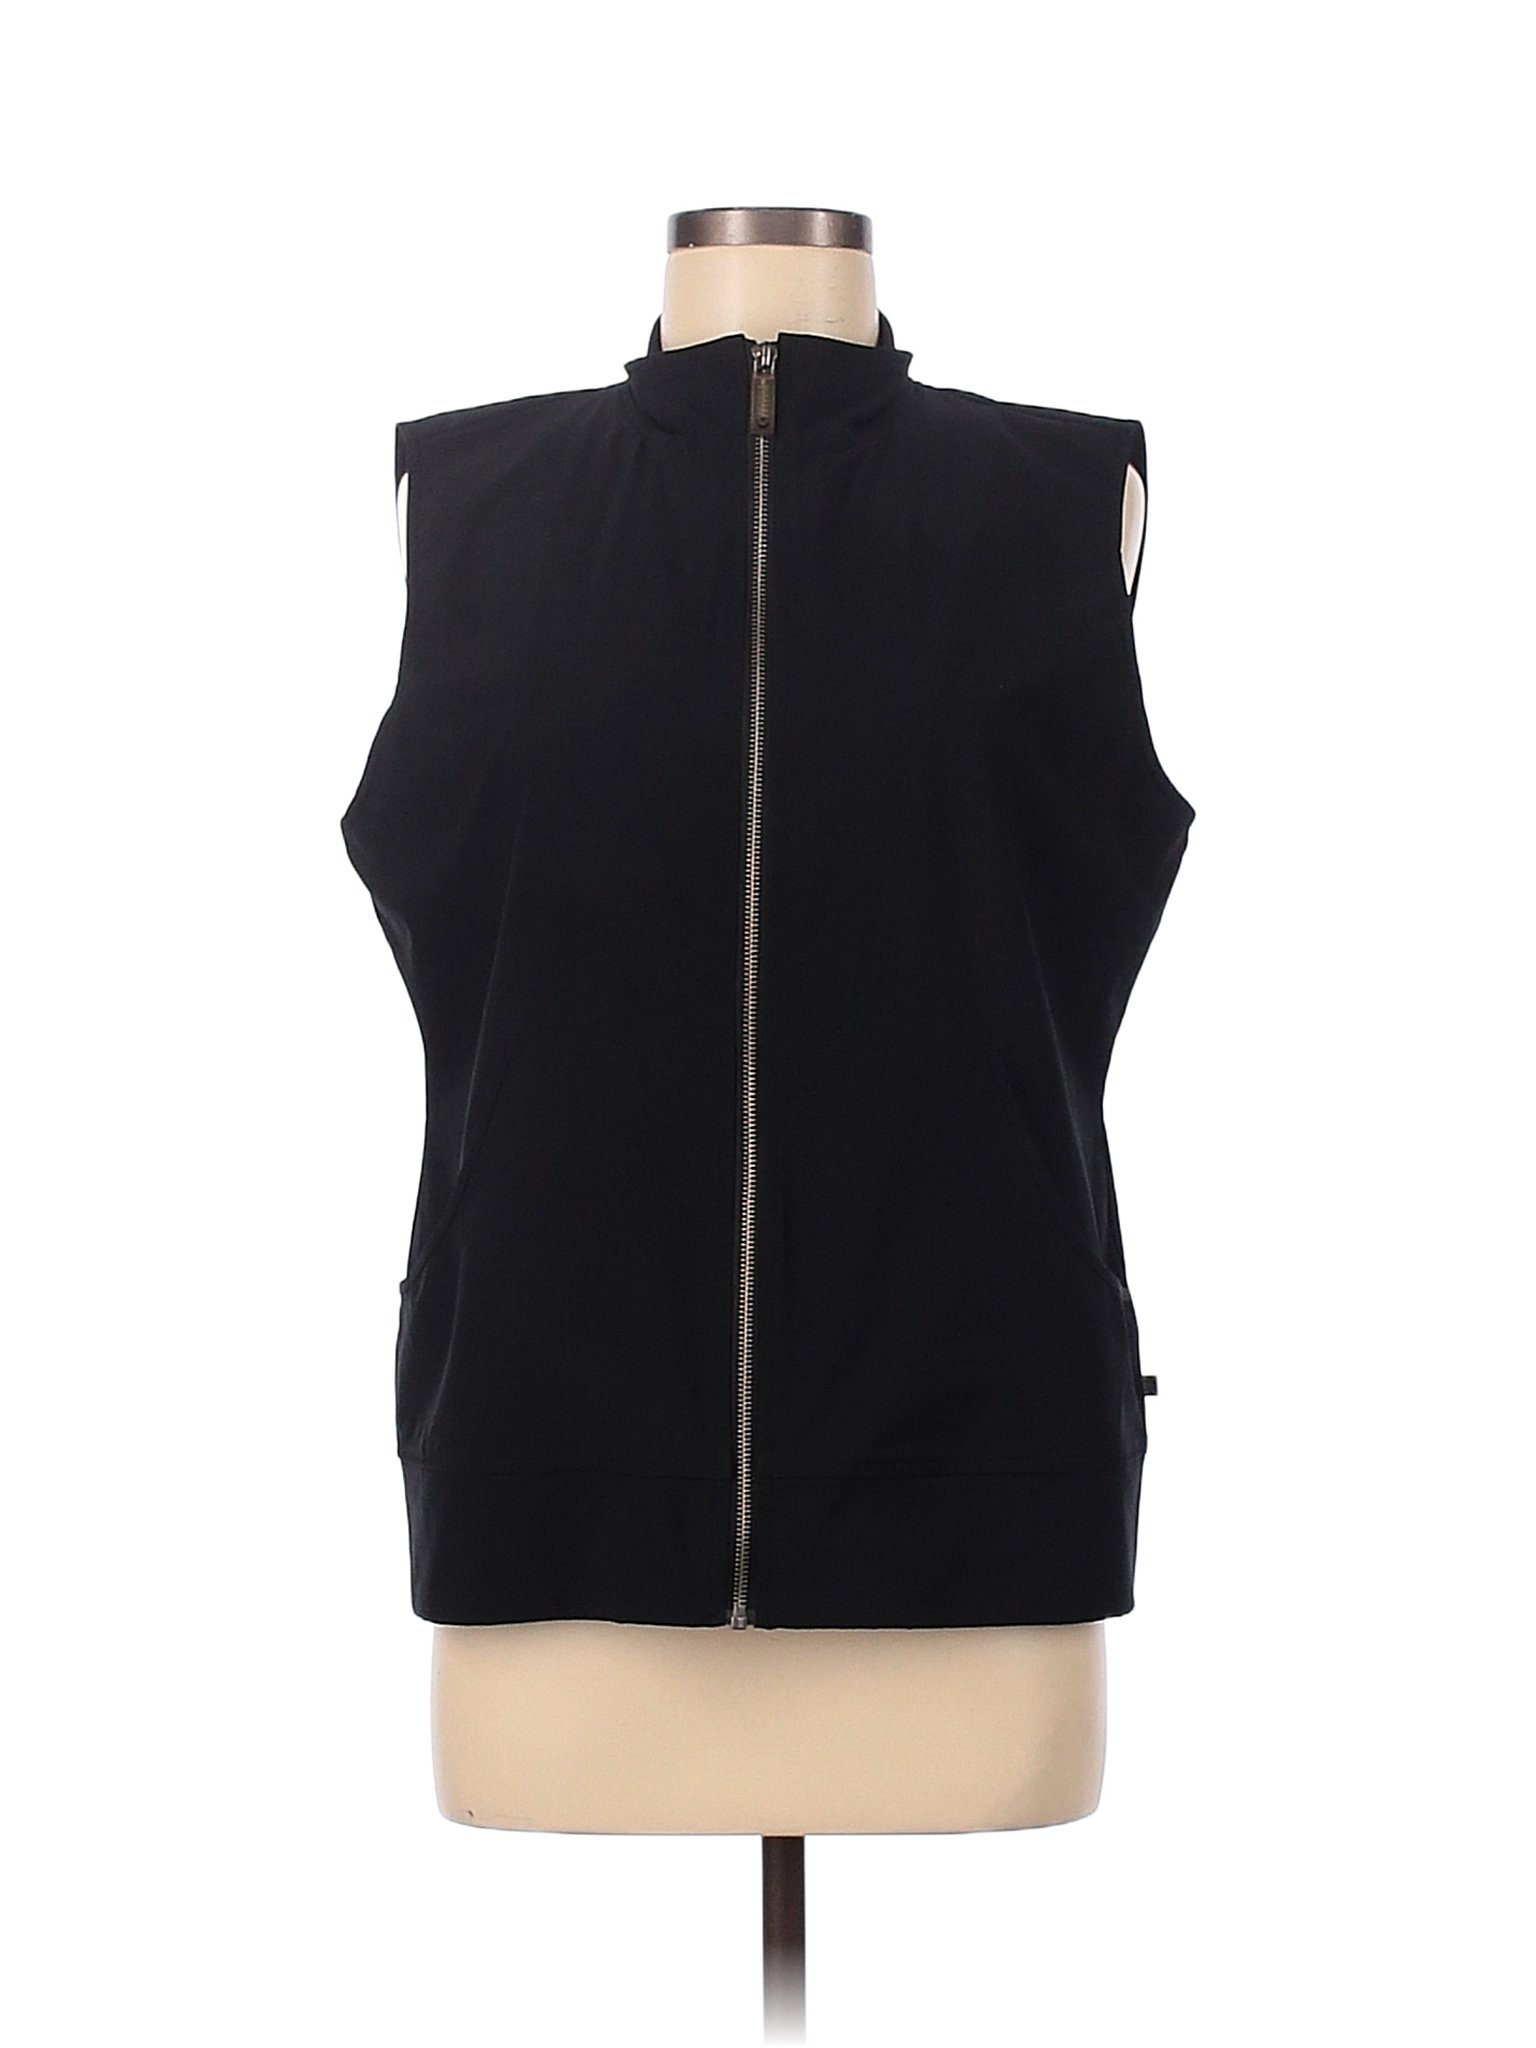 Zenergy by Chico's Solid Black Vest Size Lg (2) - 71% off | thredUP